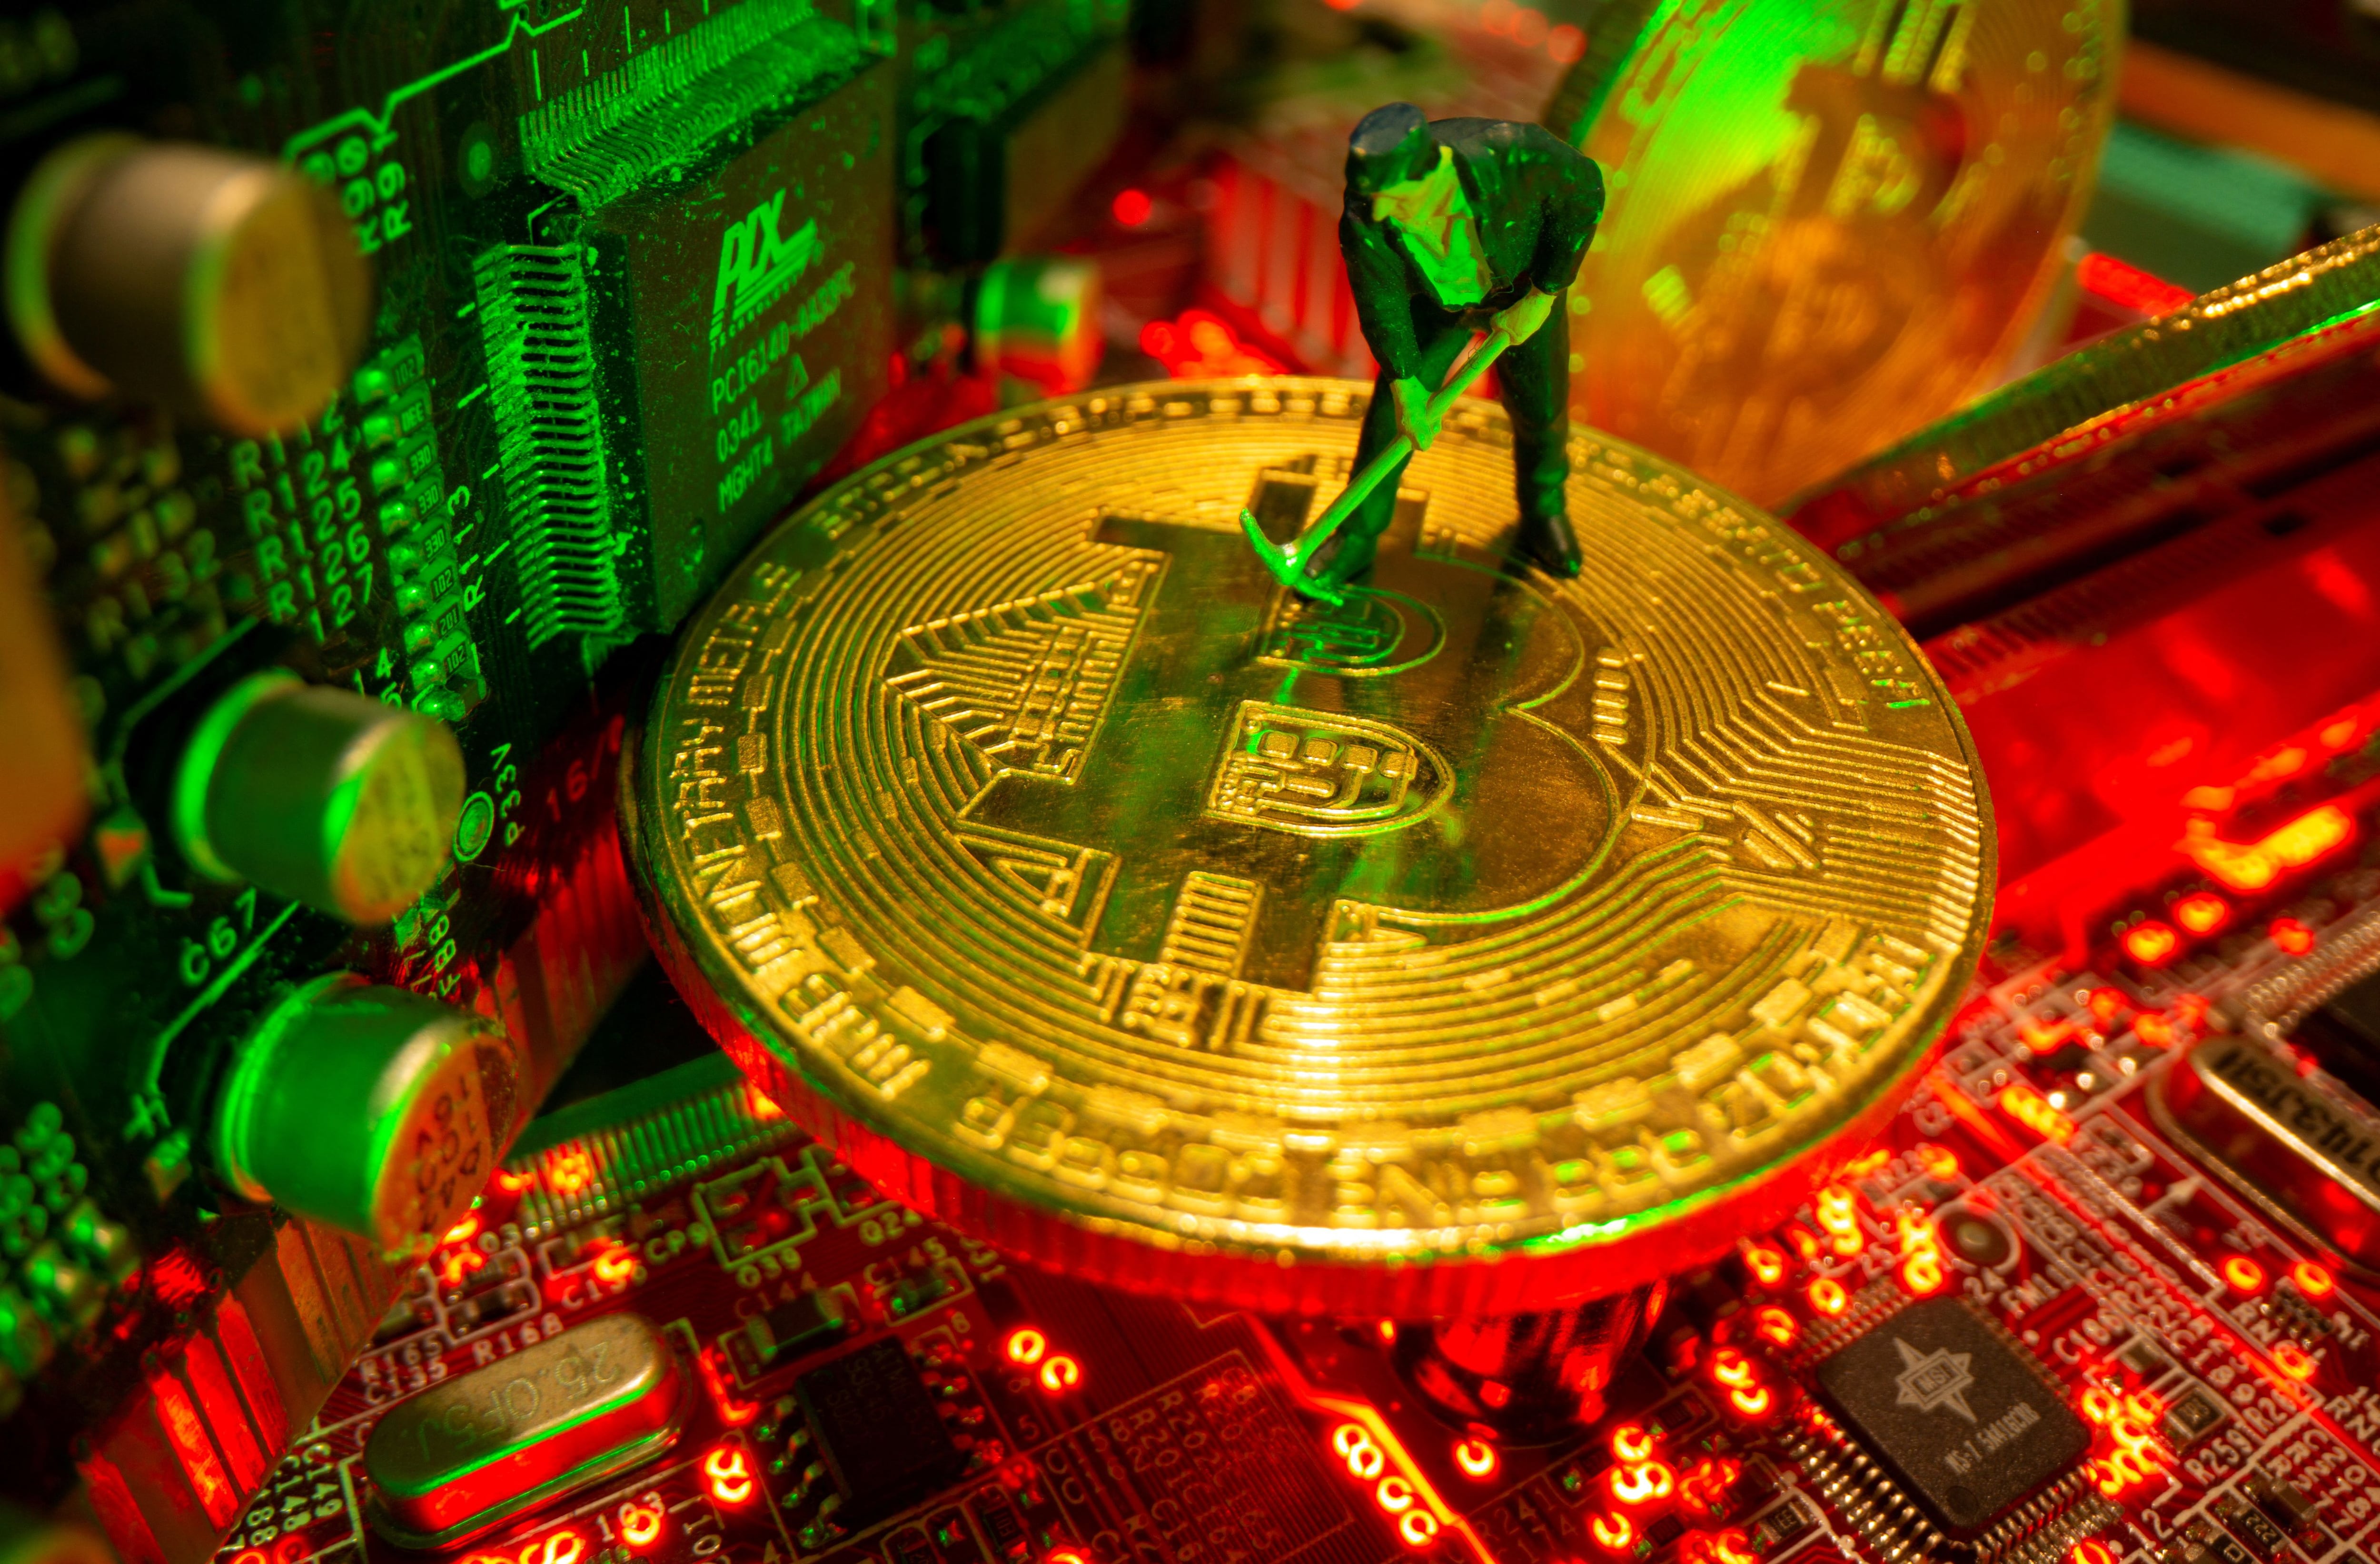 FILE PHOTO: A small toy figure and representations of the virtual currency bitcoin stand on a motherboard in this picture illustration taken May 20, 2021. REUTERS/Dado Ruvic/Illustration/File Photo